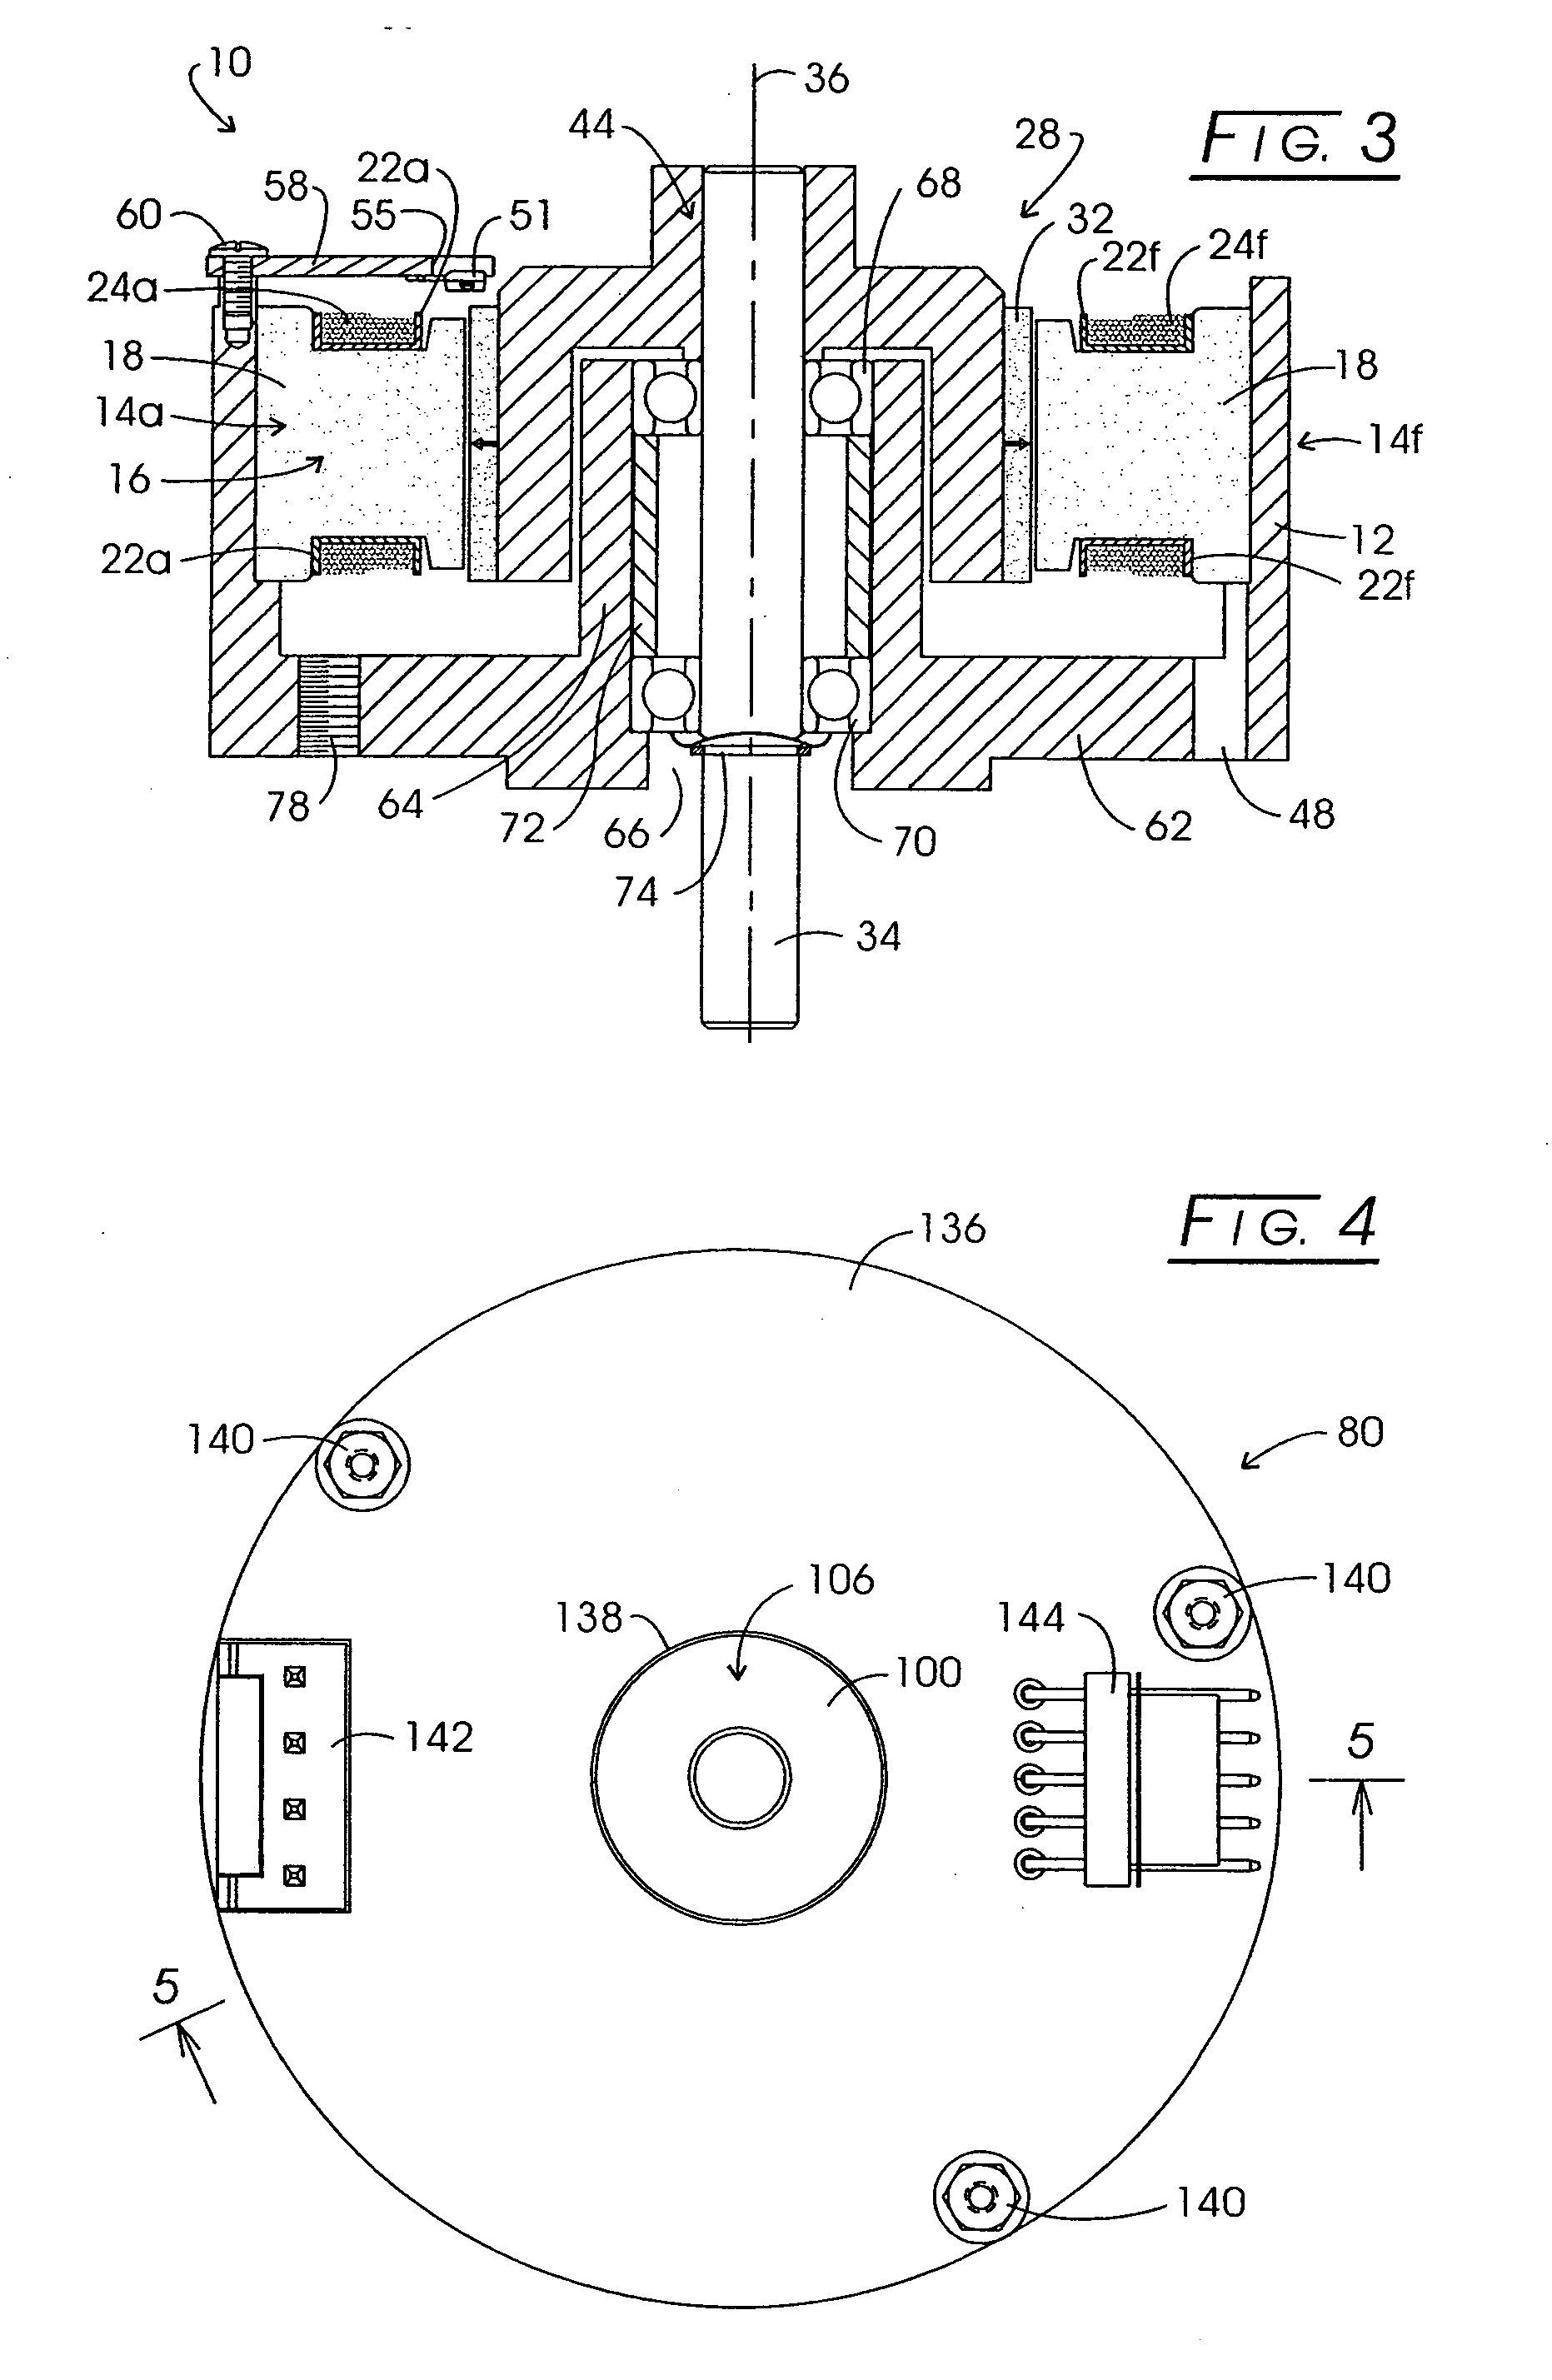 Apparatus and method for dissipating a portion of the commutation derived collapsing field energy in a multi-phase unipolar electric motor